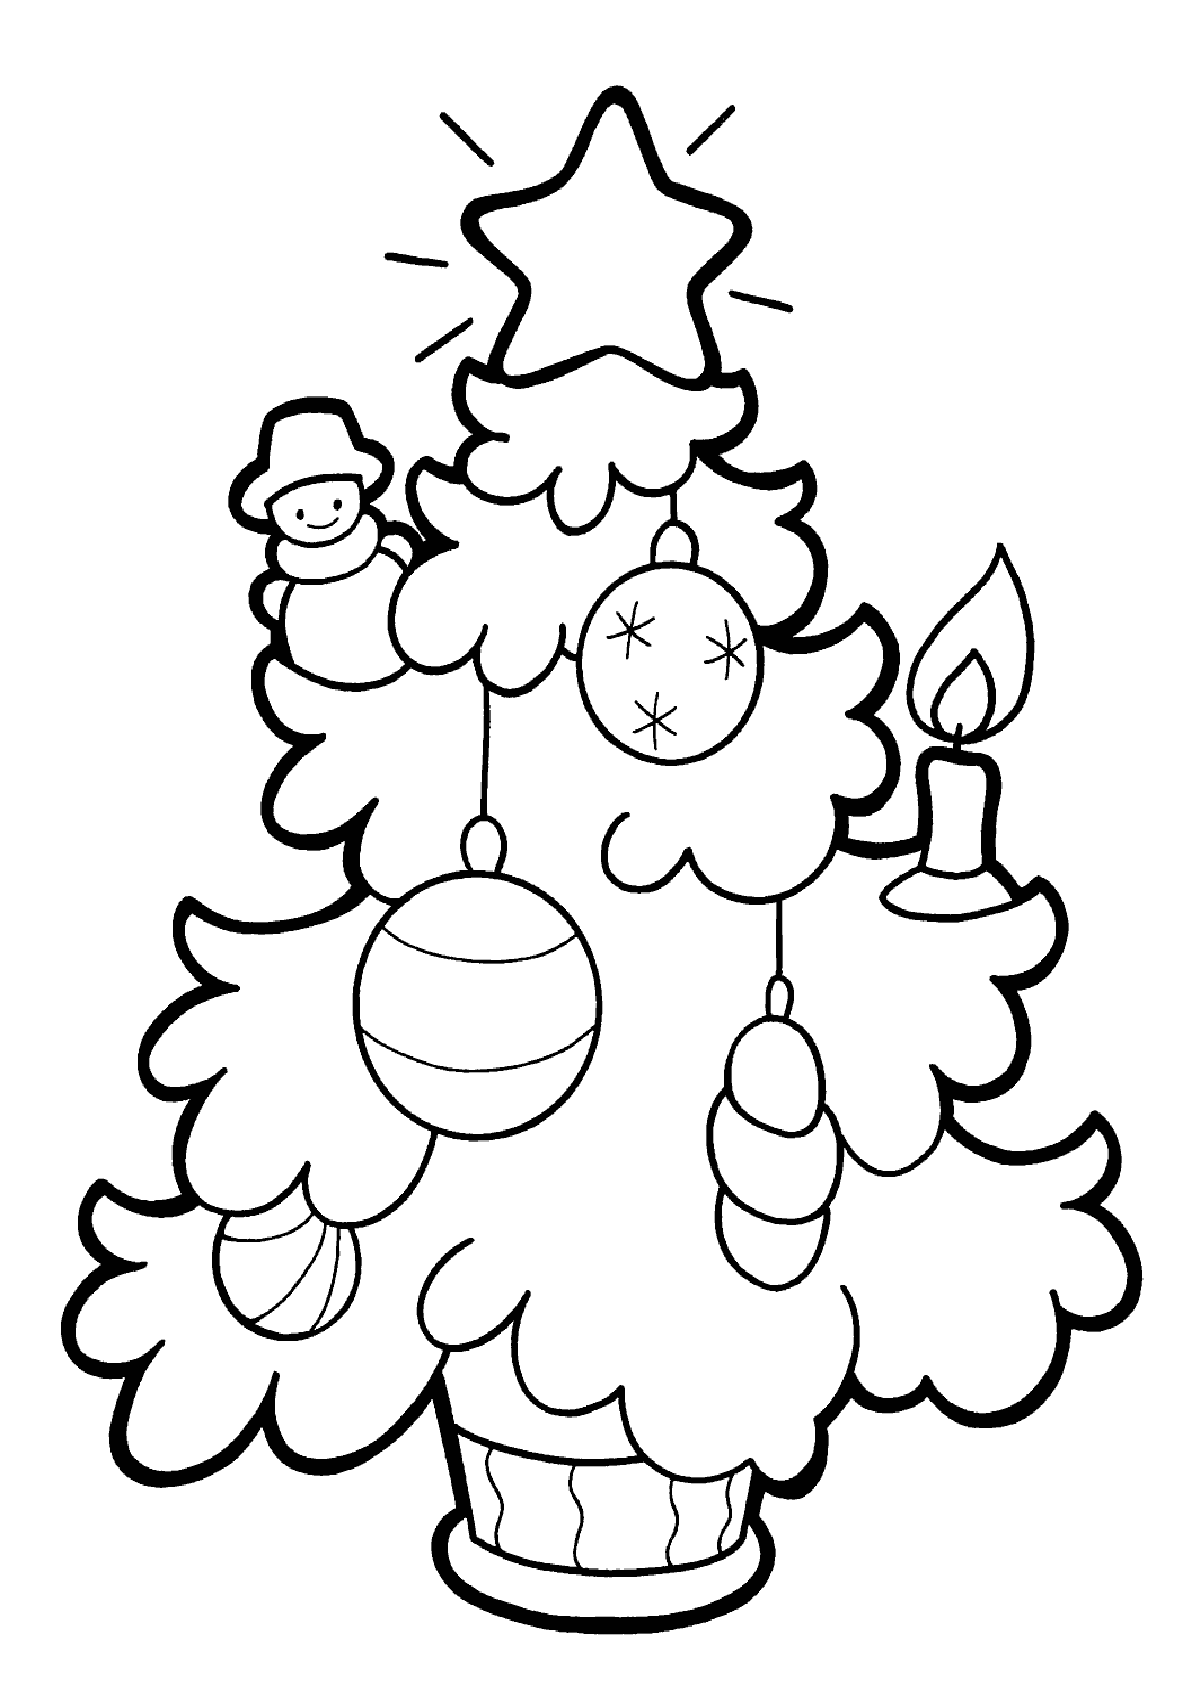 Christmas Coloring Pages For Preschoolers To Print - 154+ SVG Cut File